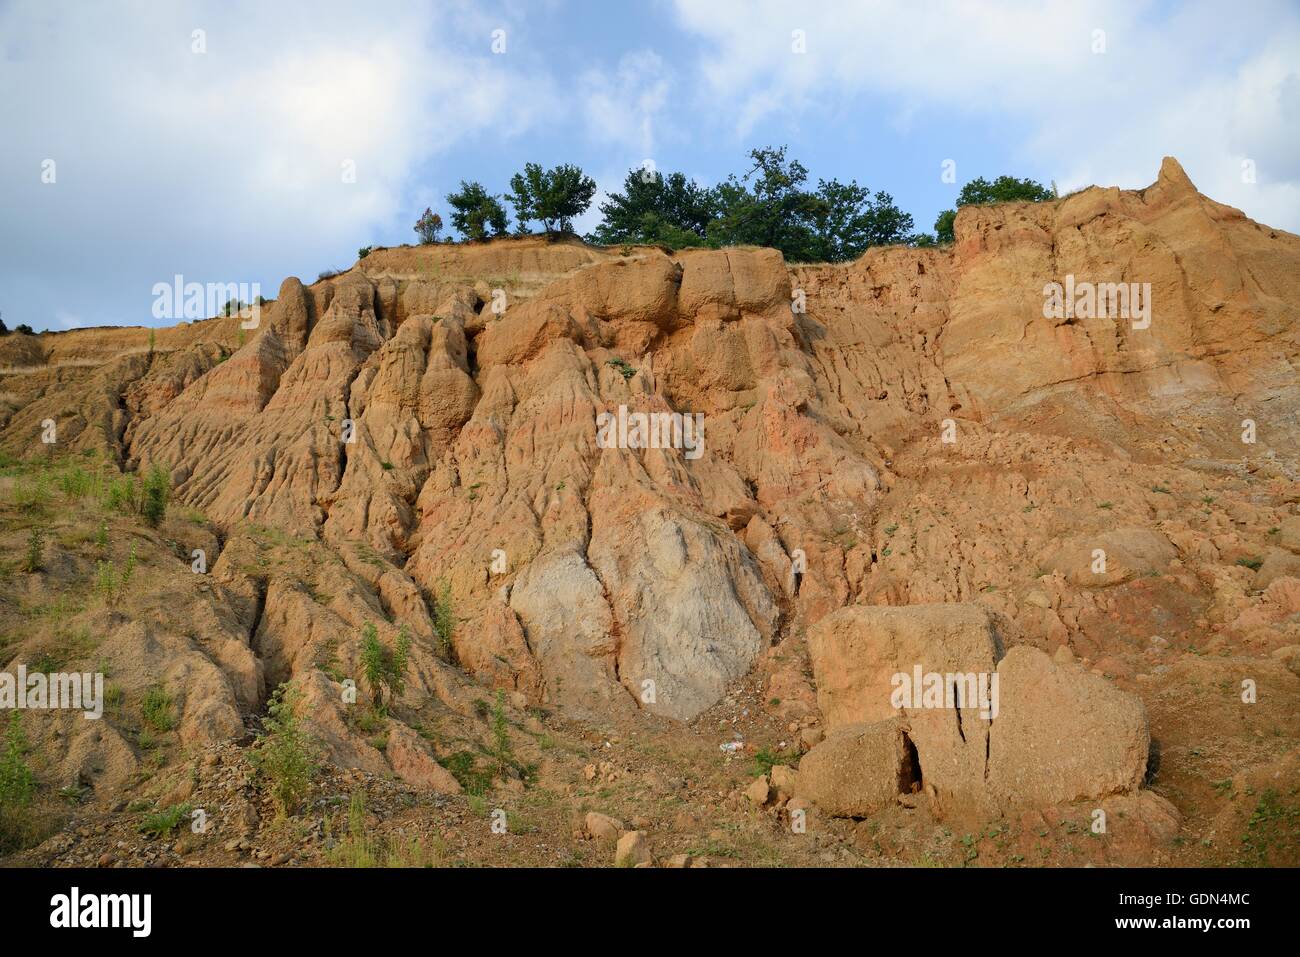 Heavily eroded, weathered soft sandstone / conglomerate cliffs, near Foca, Bosnia and Herzegovina, July. Stock Photo